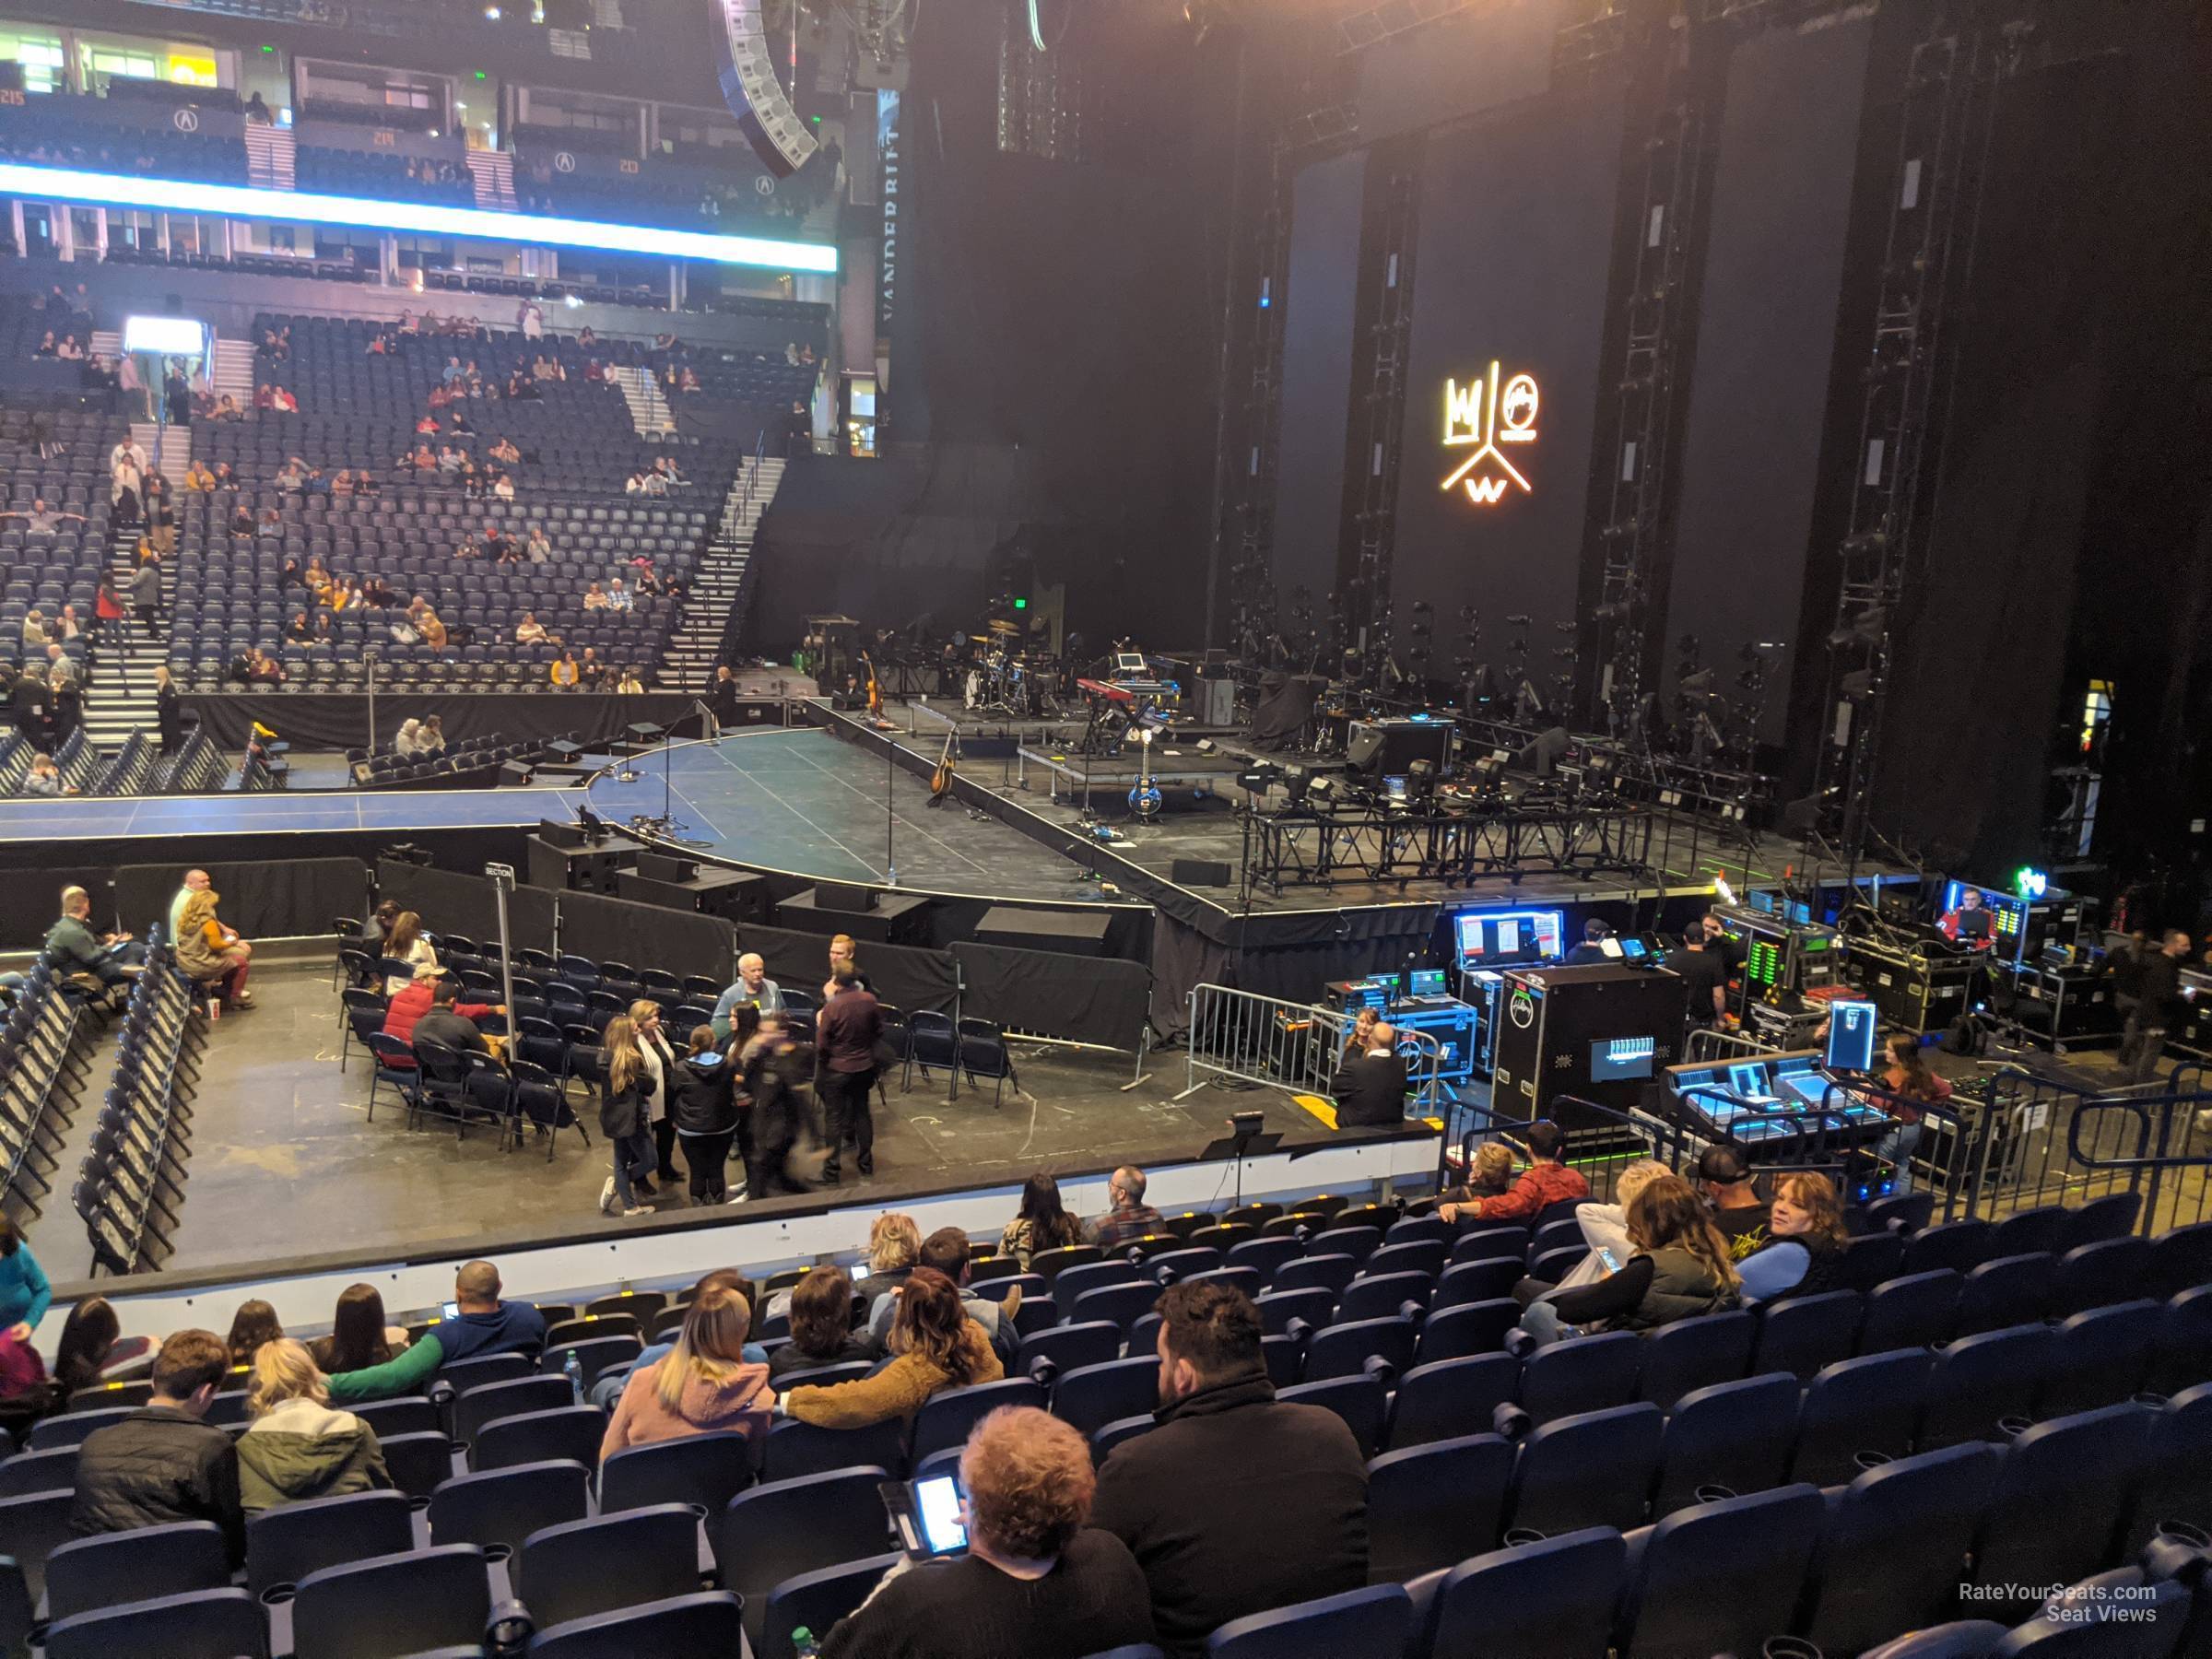 Section 107 at Bridgestone Arena for Concerts